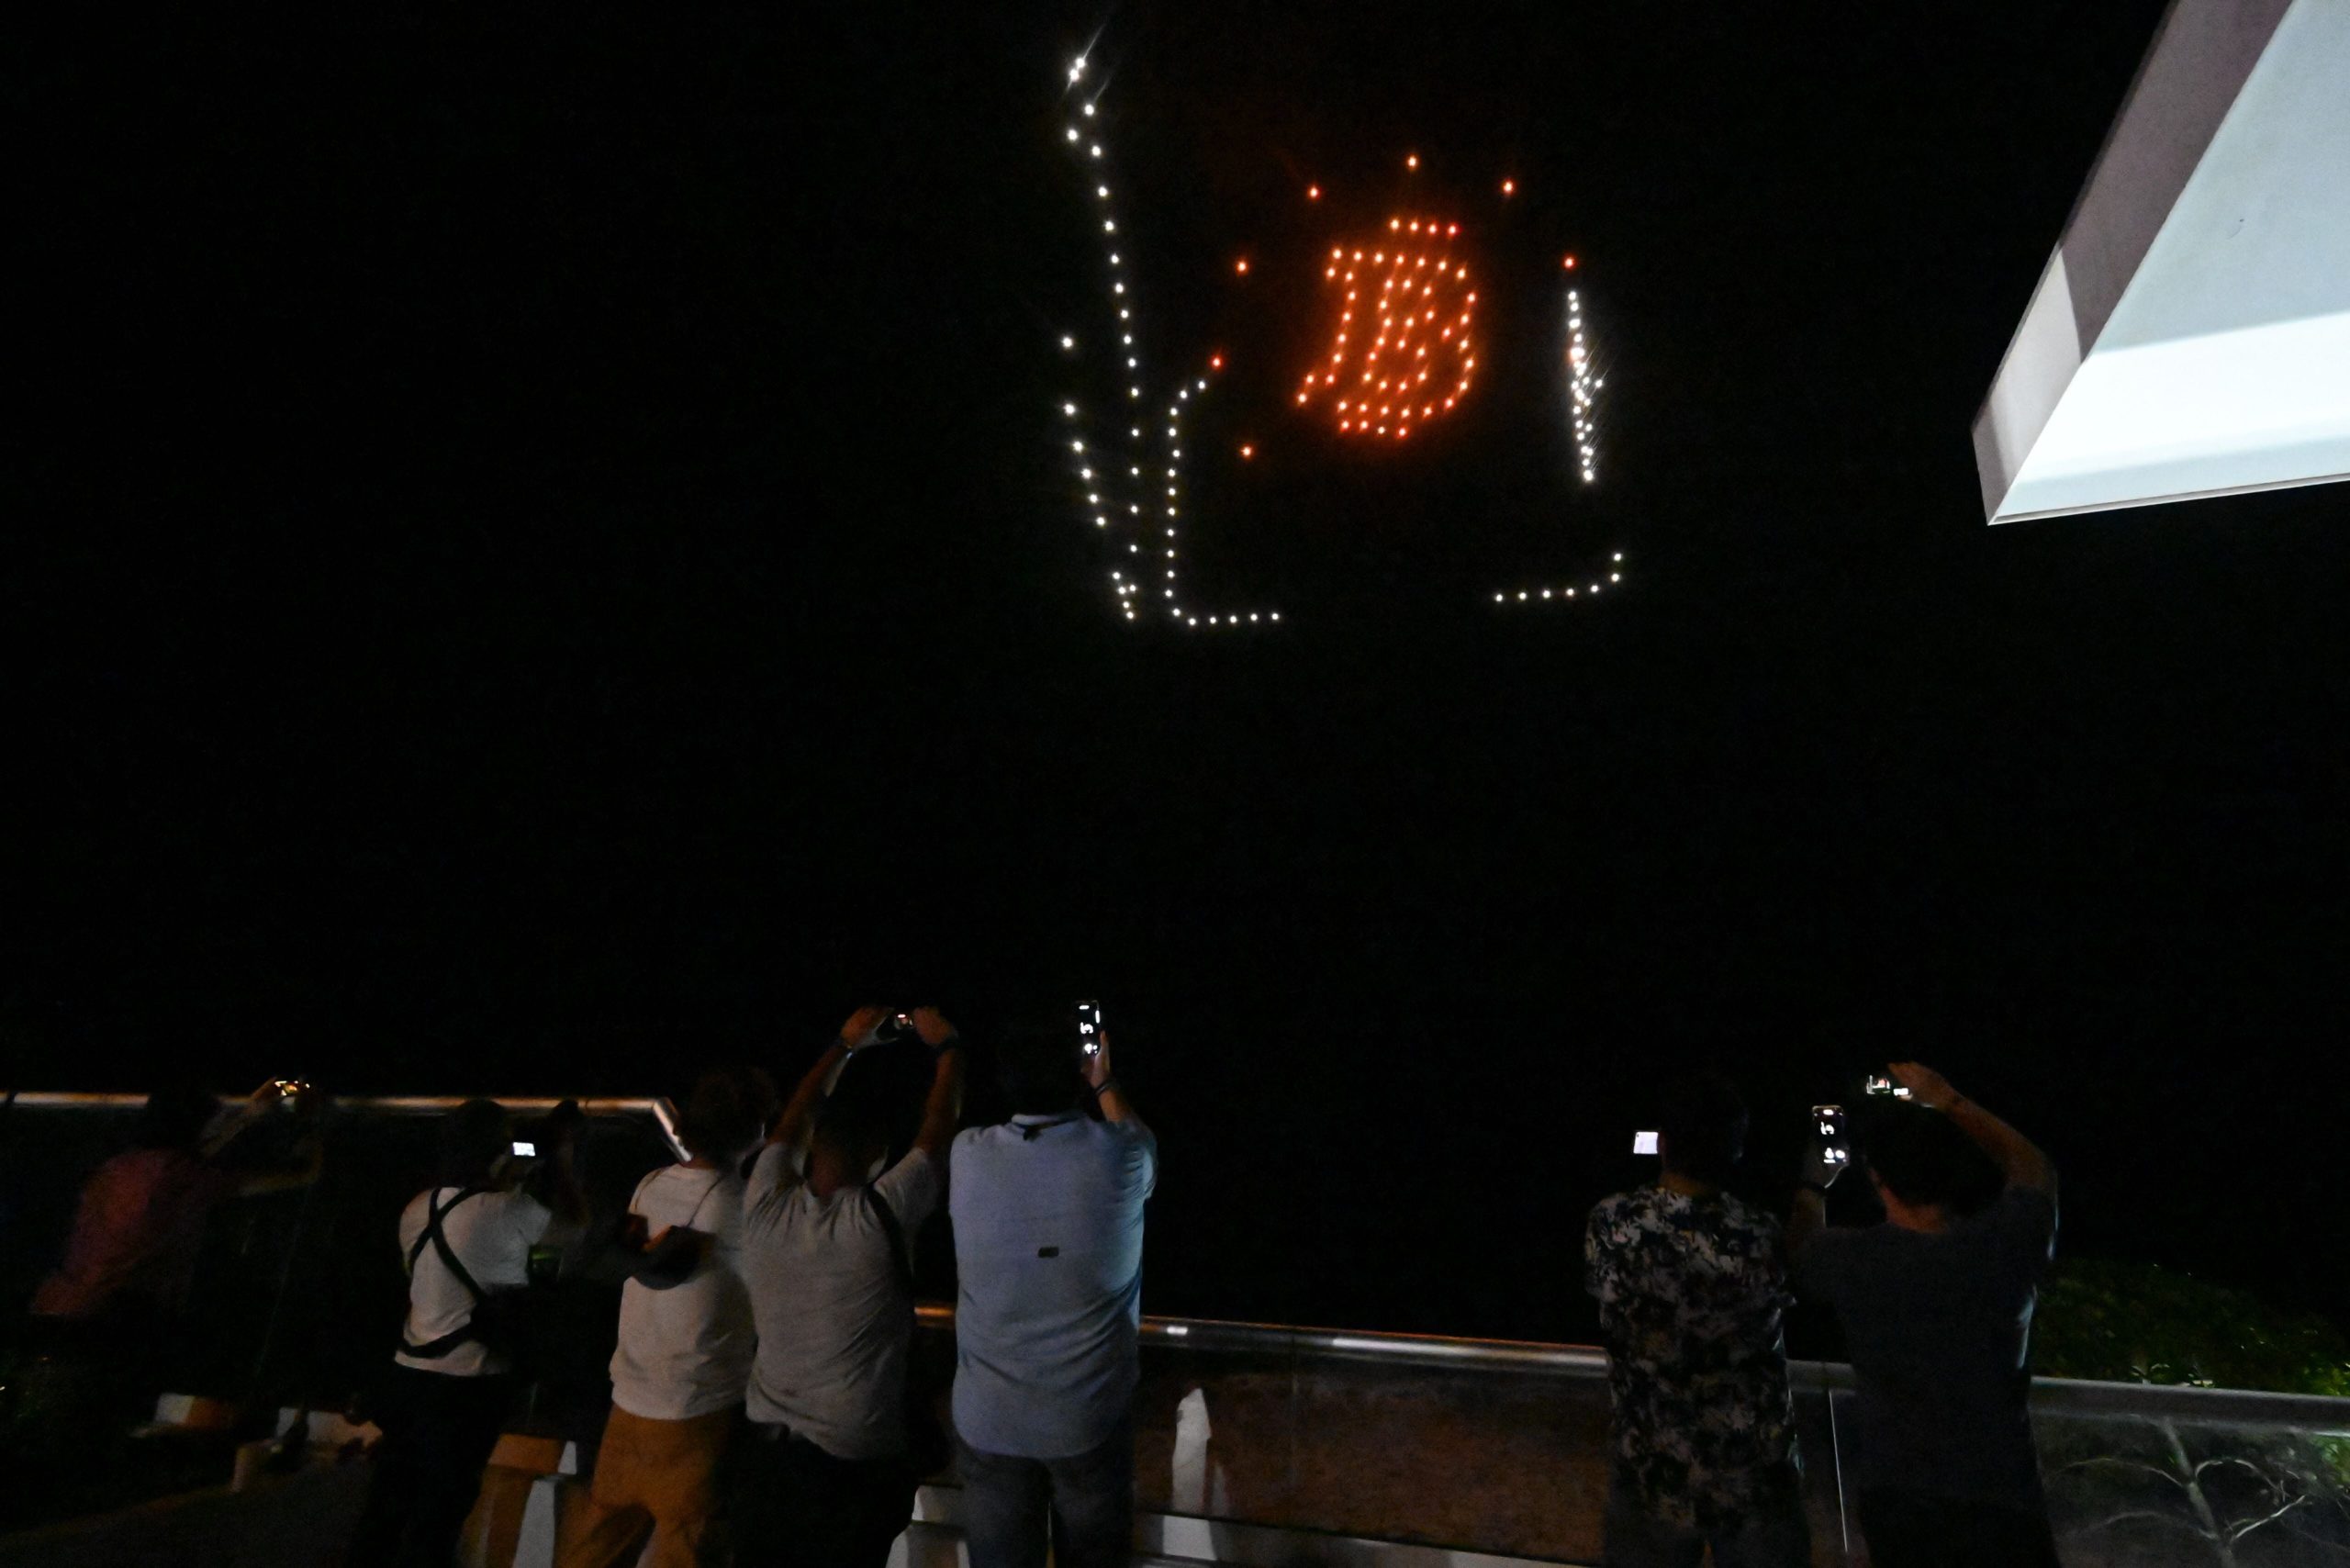 People take pictures as illuminated drones form figures inspired by the bitcoin logo at a reception hosted by American cryptocurrency developer and billionaire Brock Pierce on the first day of bitcoin's implementation as a currency in El Salvador, in El Sunzal Beach on September 7, 2021.  (Photo: Marvin Recinos/AFP, Getty Images)